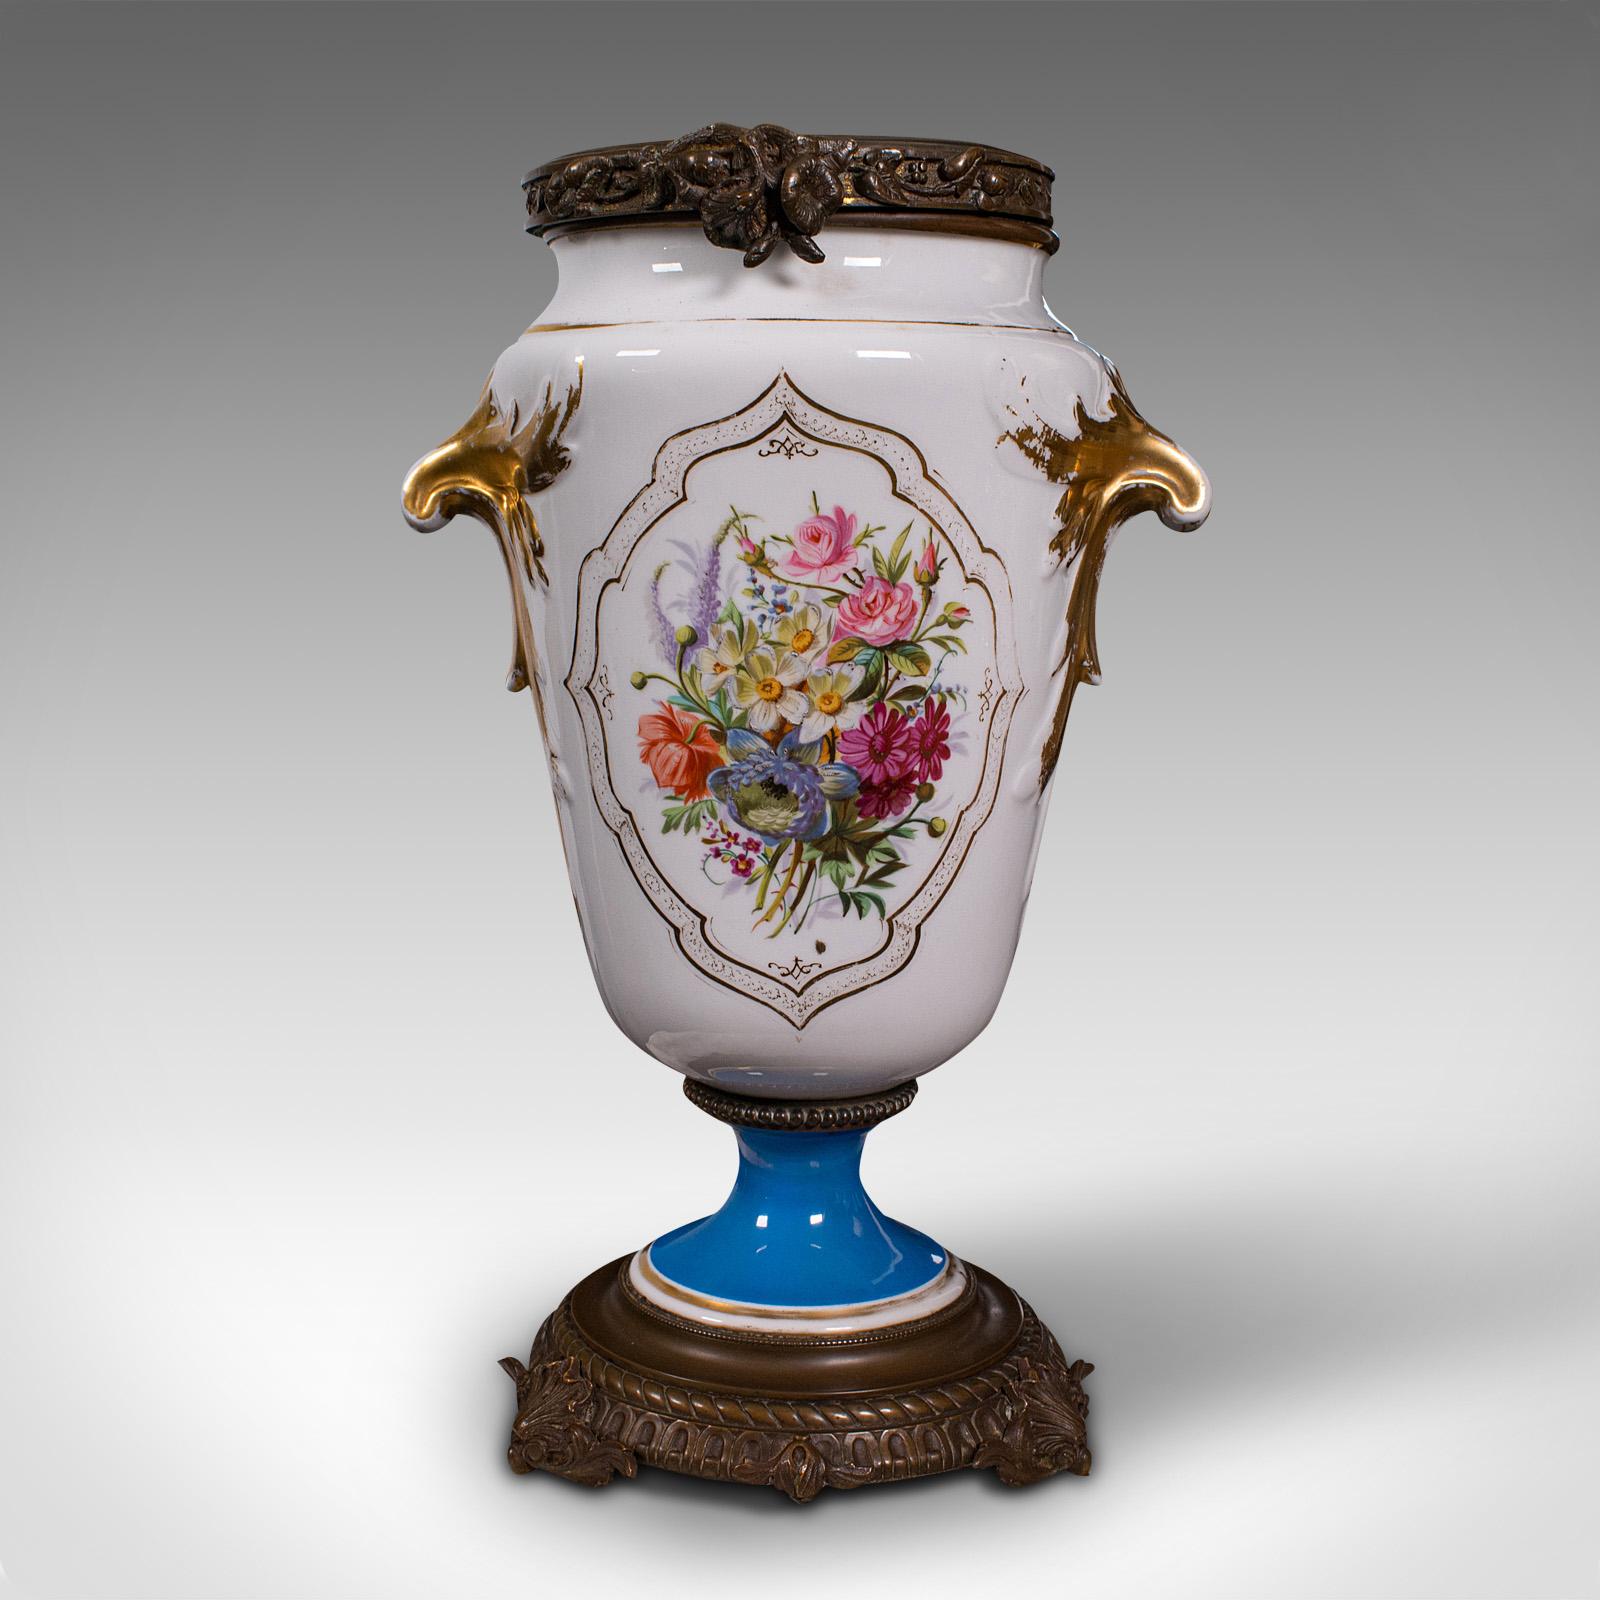 This is an antique decorative jardiniere. A French, ceramic and gilt metal display planter or vase, dating to the late Victorian period, circa 1900.

Attractive display jardiniere with appealing French taste
Displays a desirable aged patina and in